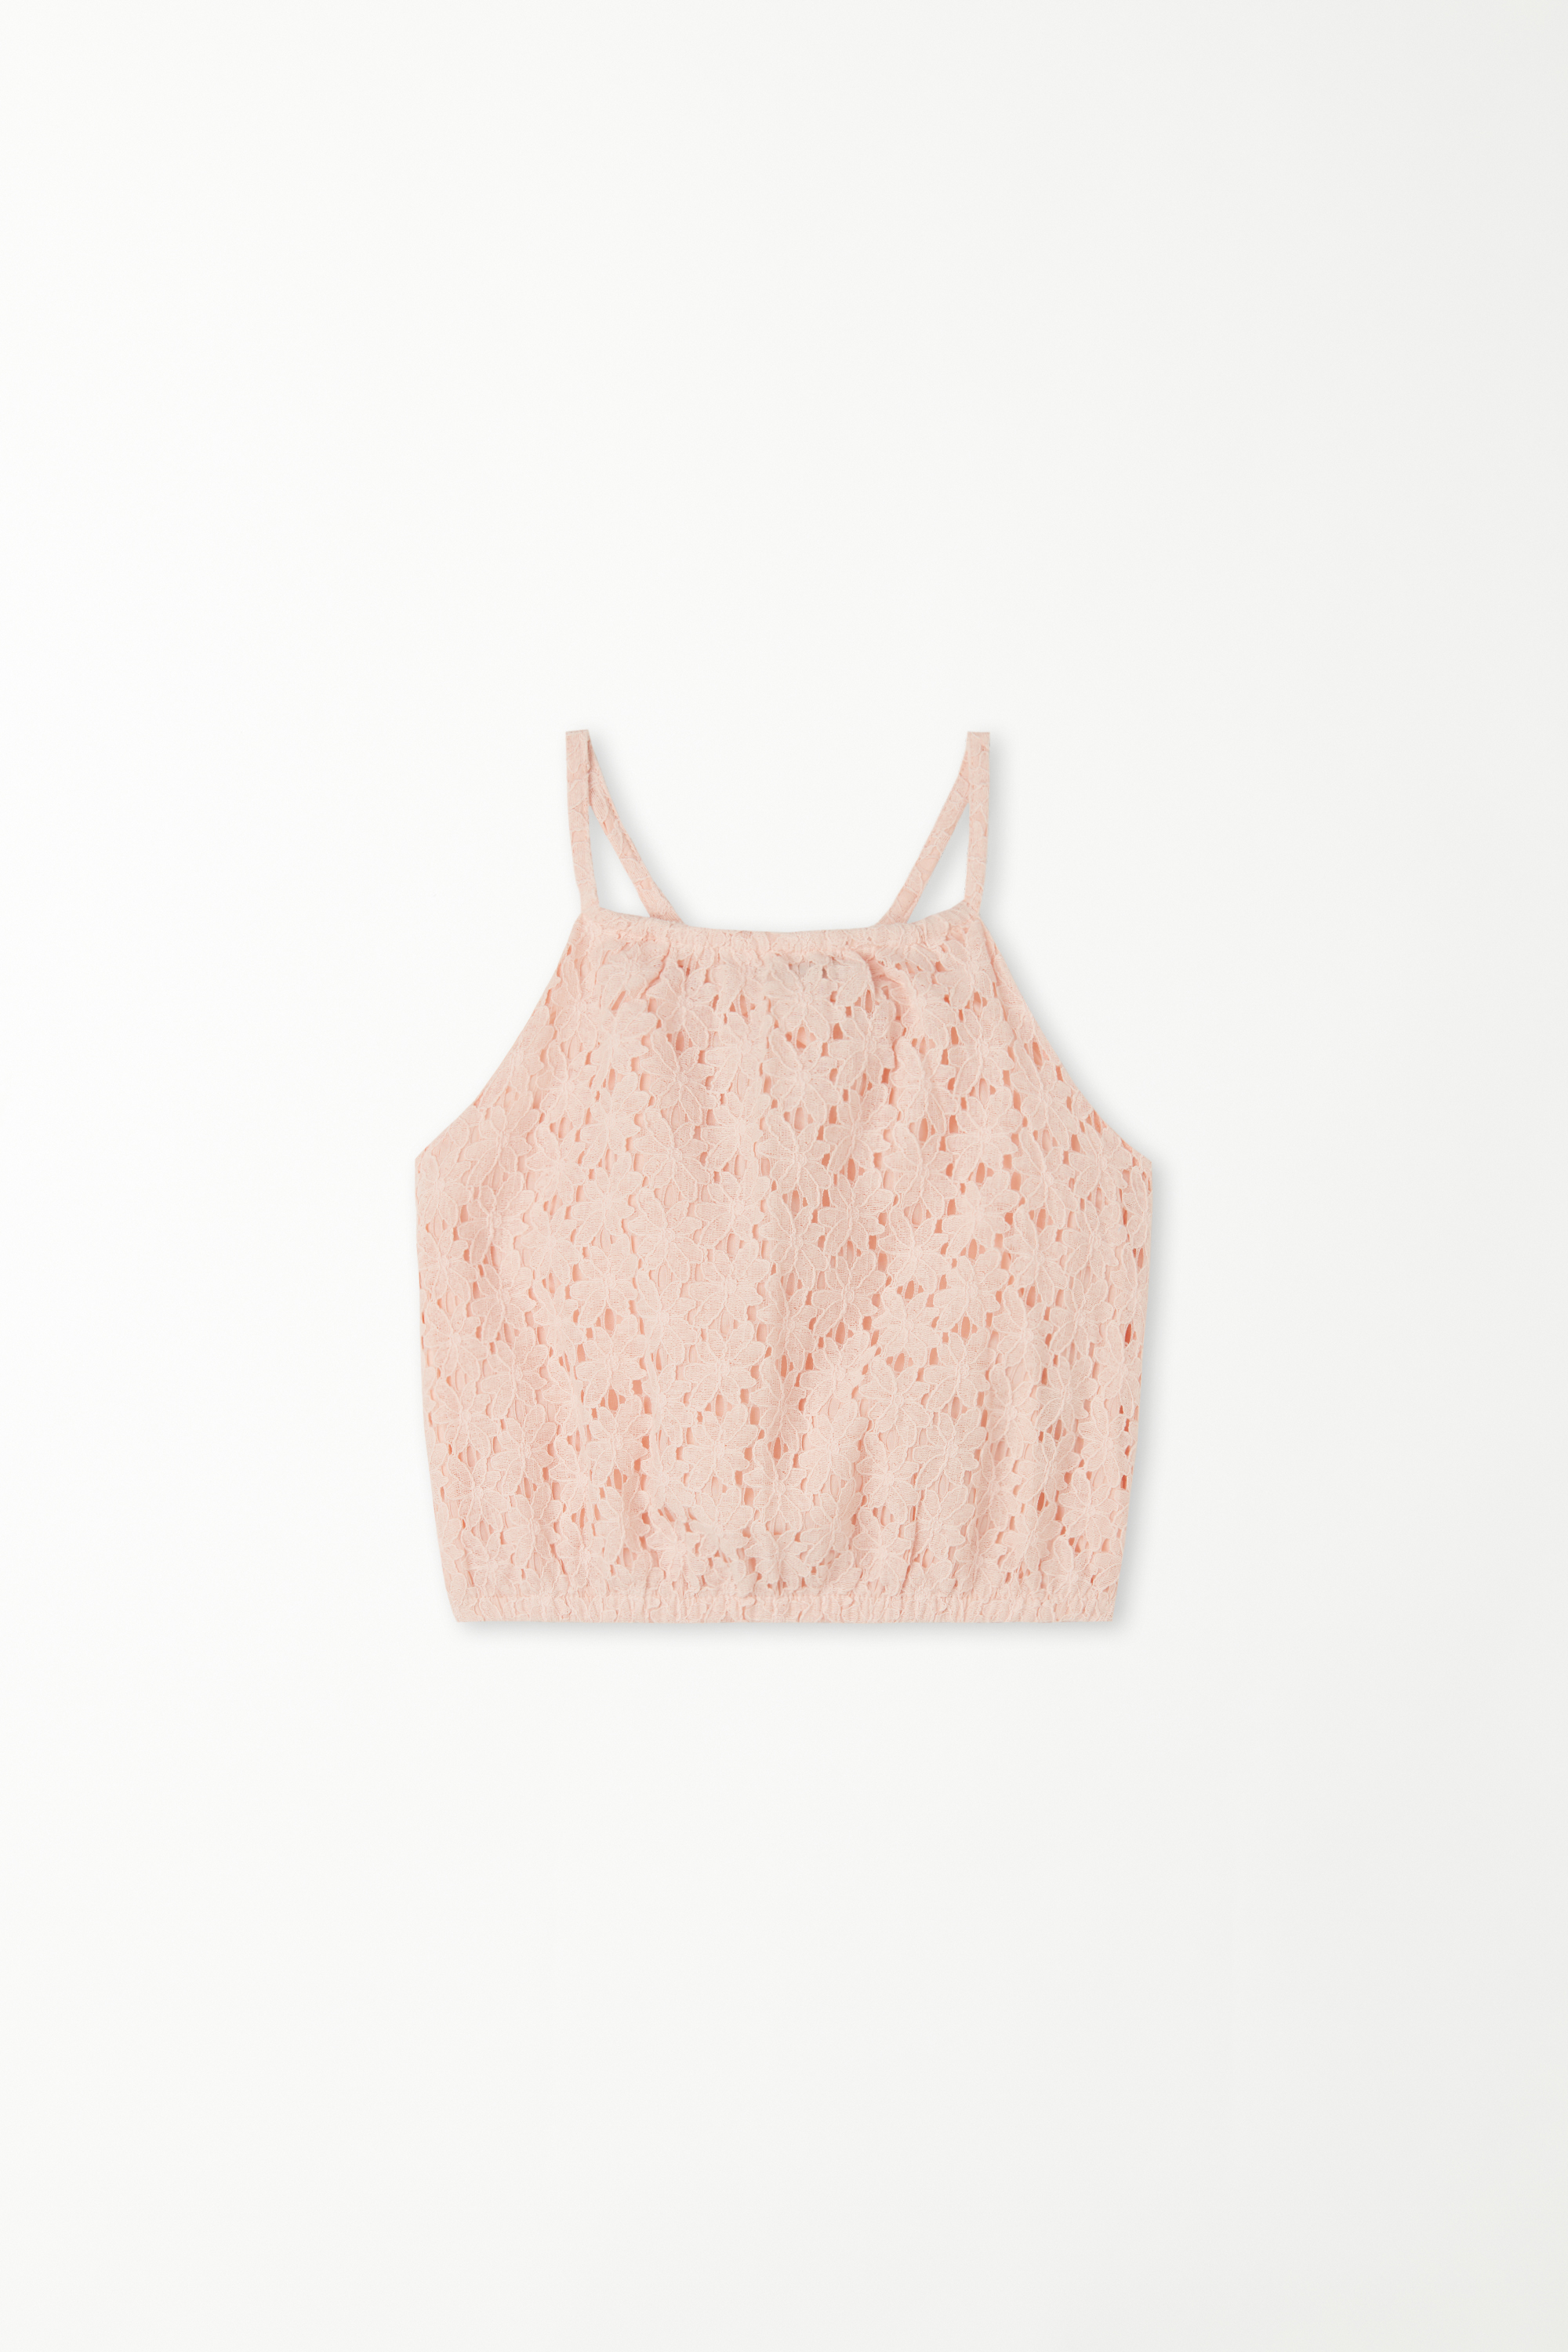 Girls’ Camisole Top with Thin Shoulder Straps made of Lace